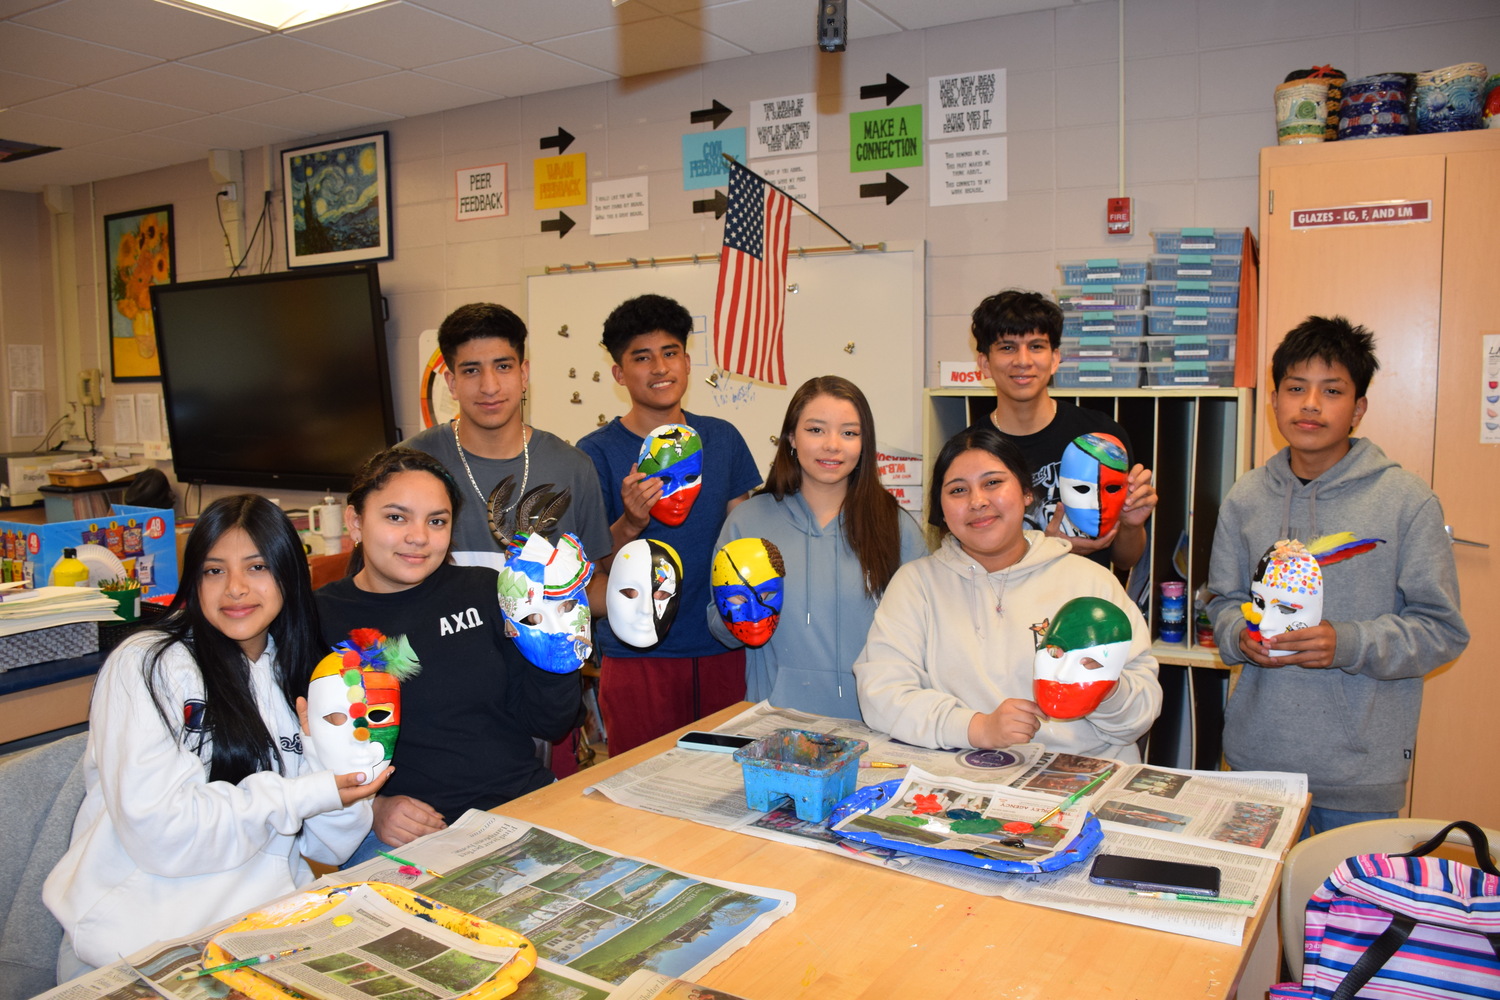 A grant from the Partners in Education, Arts and Community Empowerment Program and the Patchogue Arts Council has offered Hampton Bays High School students a way to creatively express themselves through poetry and art with the assistance of author Adriana Devers.
Through the grant, obtained by teacher Daniela Vargas, English as a new language students explored poetry and wrote poems about their culture, identity and country. Then they decorated and painted masks that reflected what they wrote about. The students’ work will be displayed at their school for a family and friends showcase. COURTESY HAMPTON BAYS SCHOOL DISTRICT